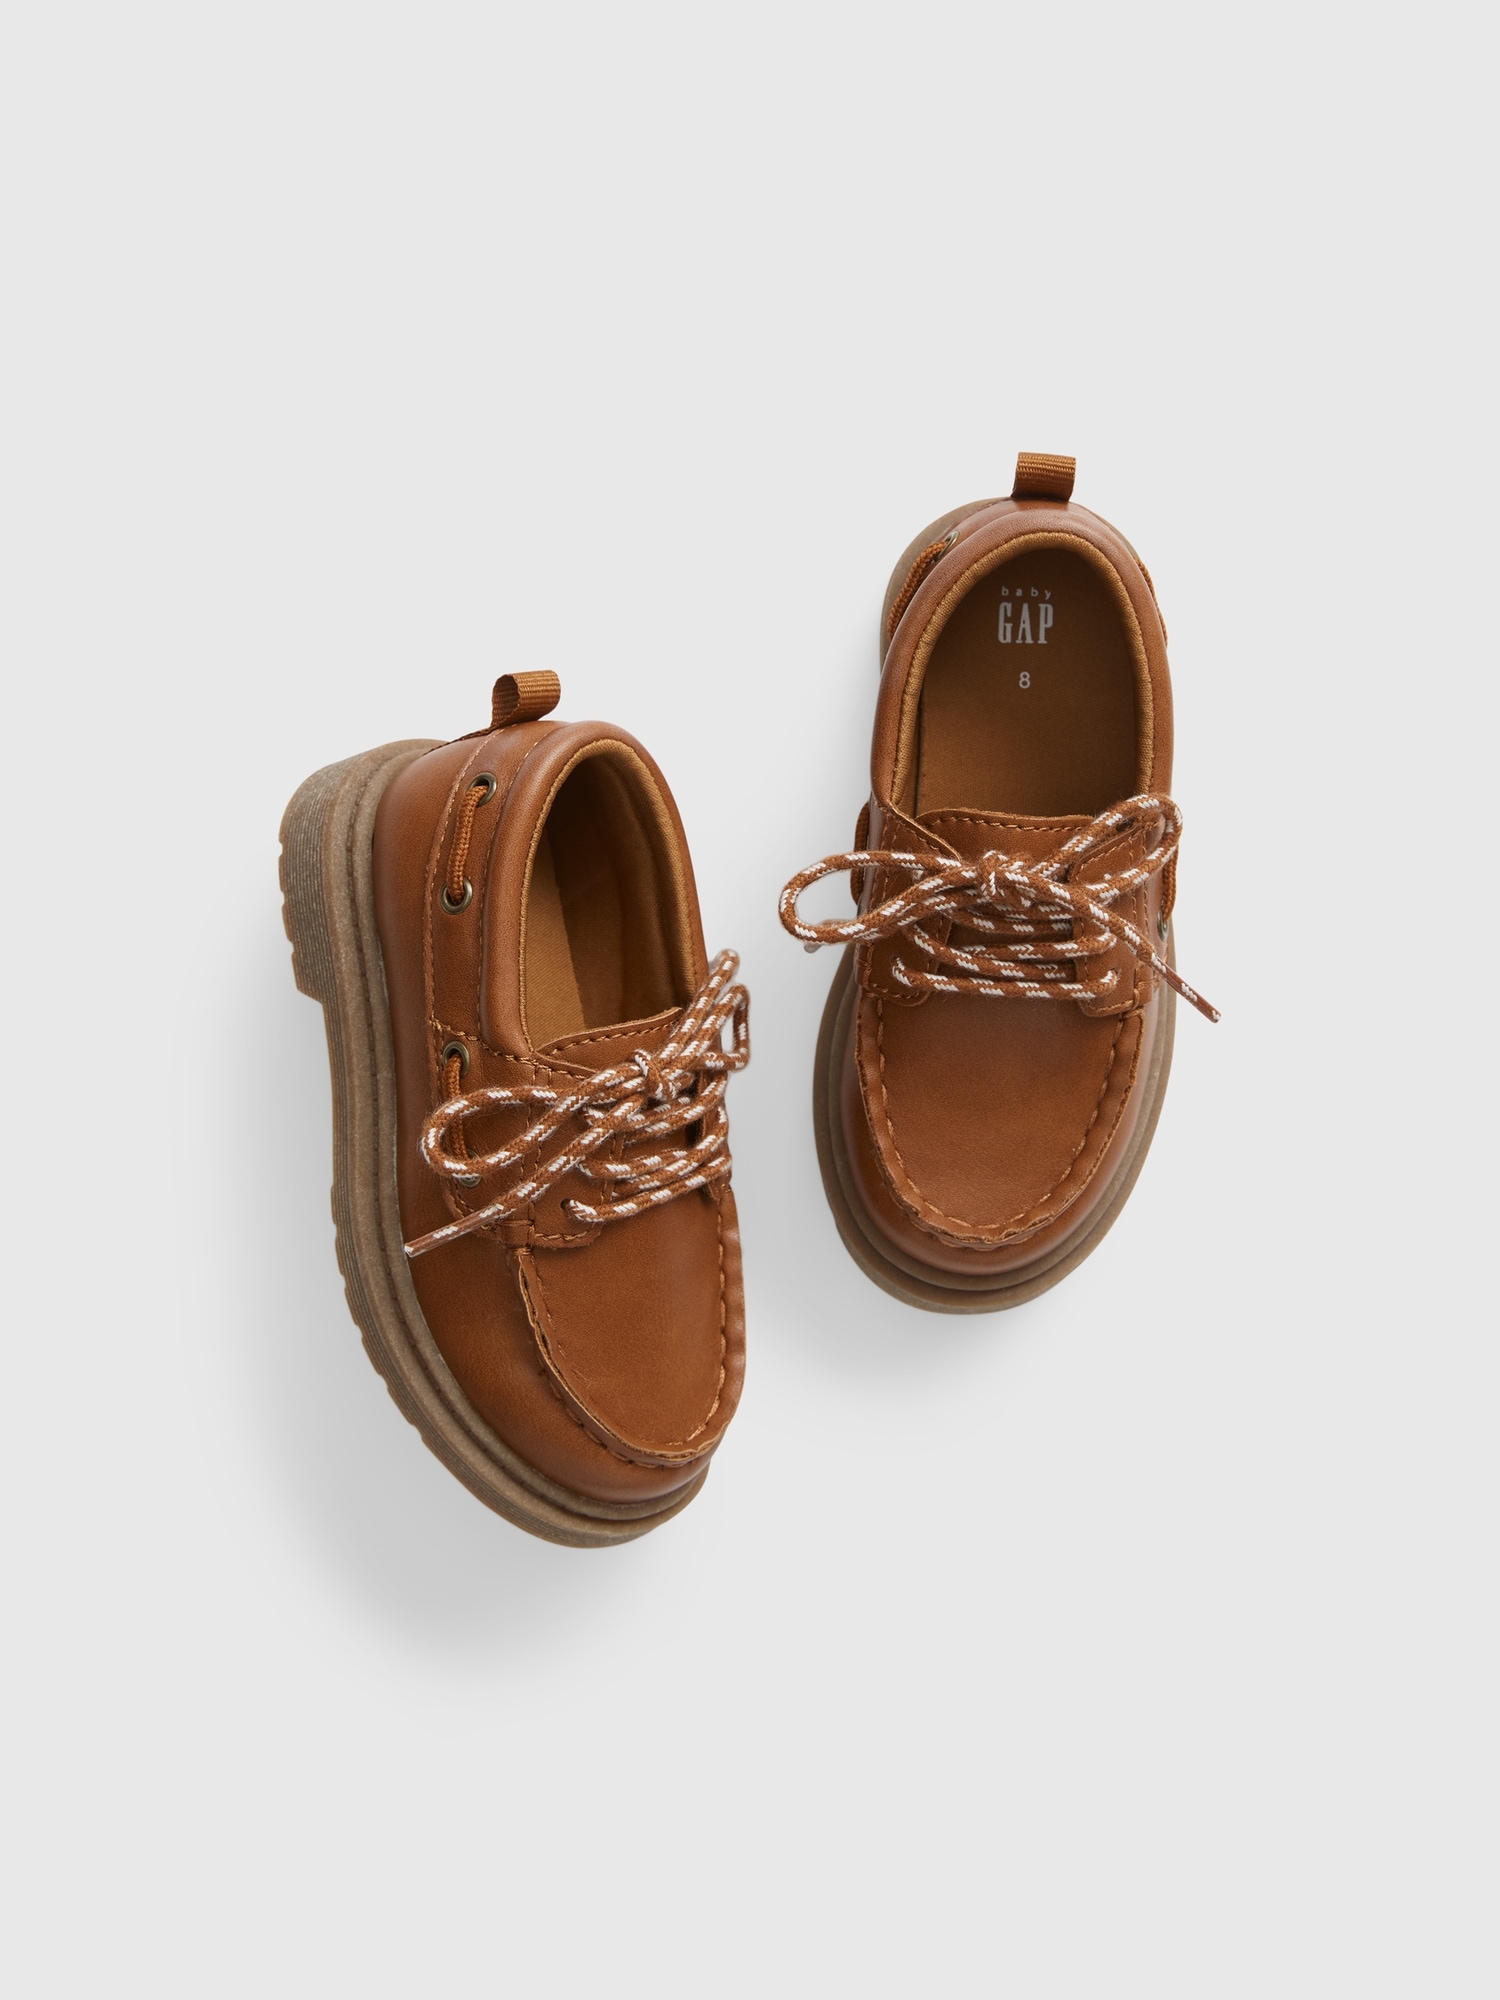 Toddler Lace-Up Loafers | Gap